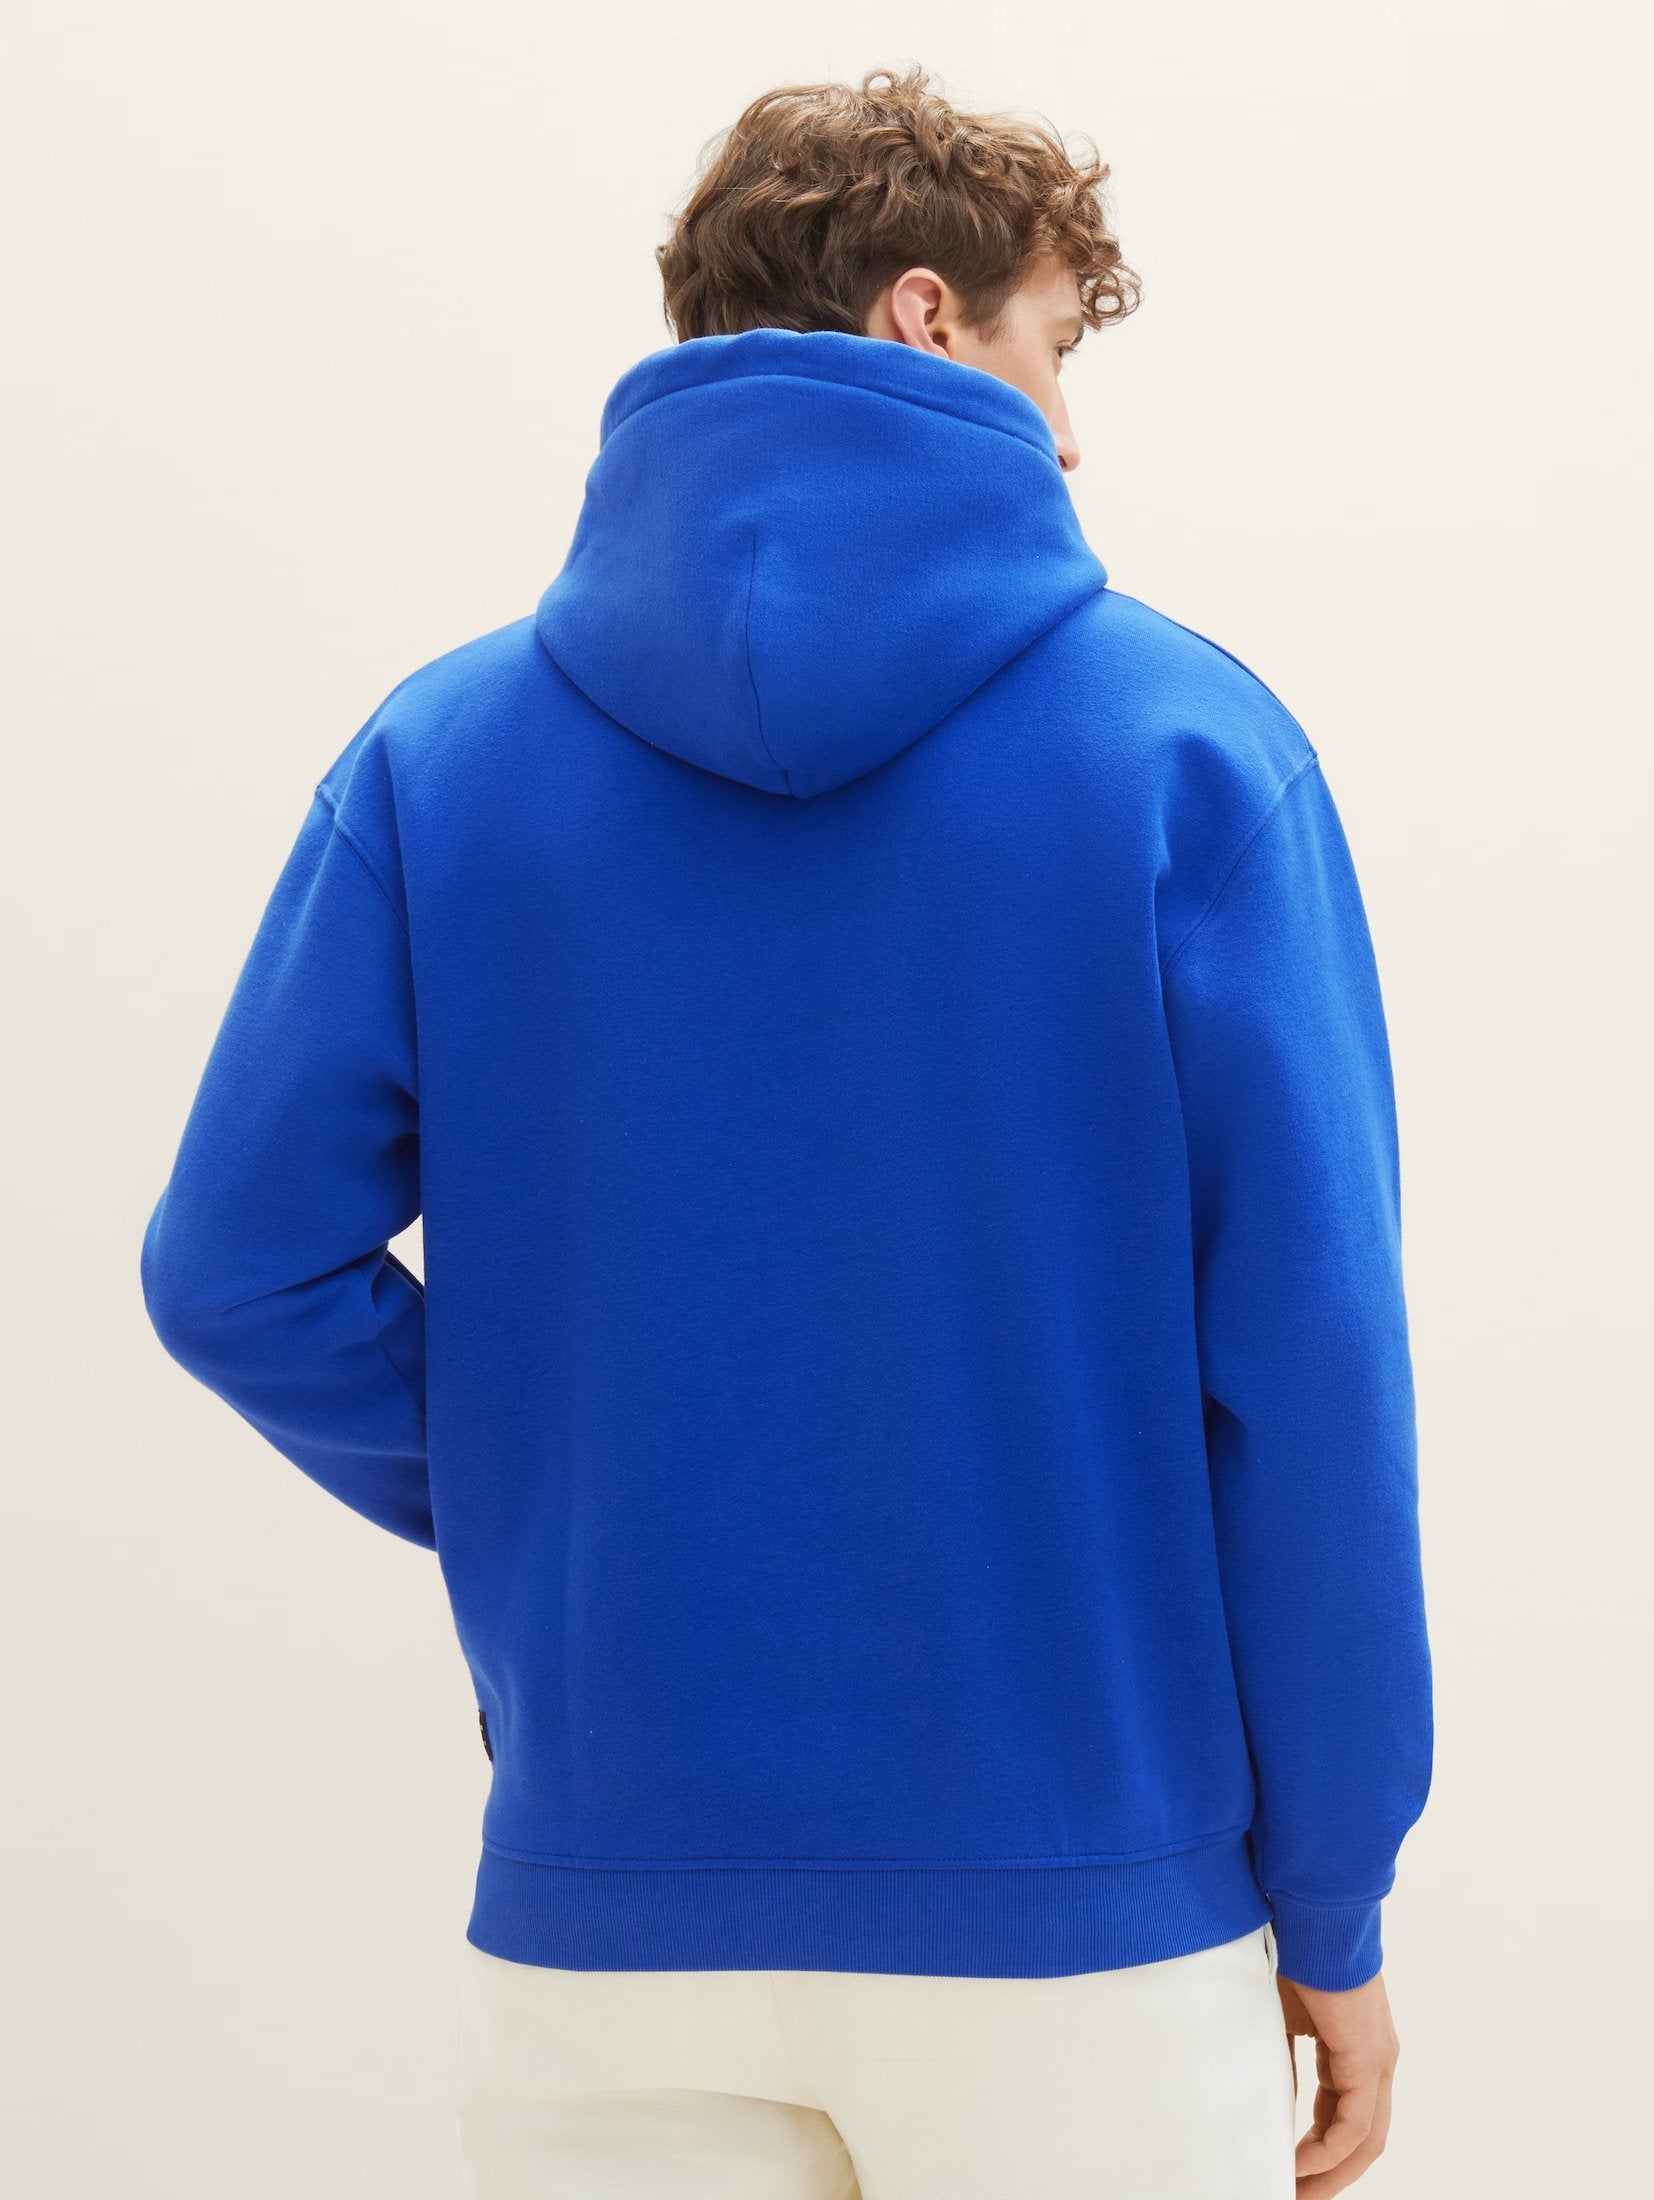 Tom Tailor Text Print Blue Hoodie